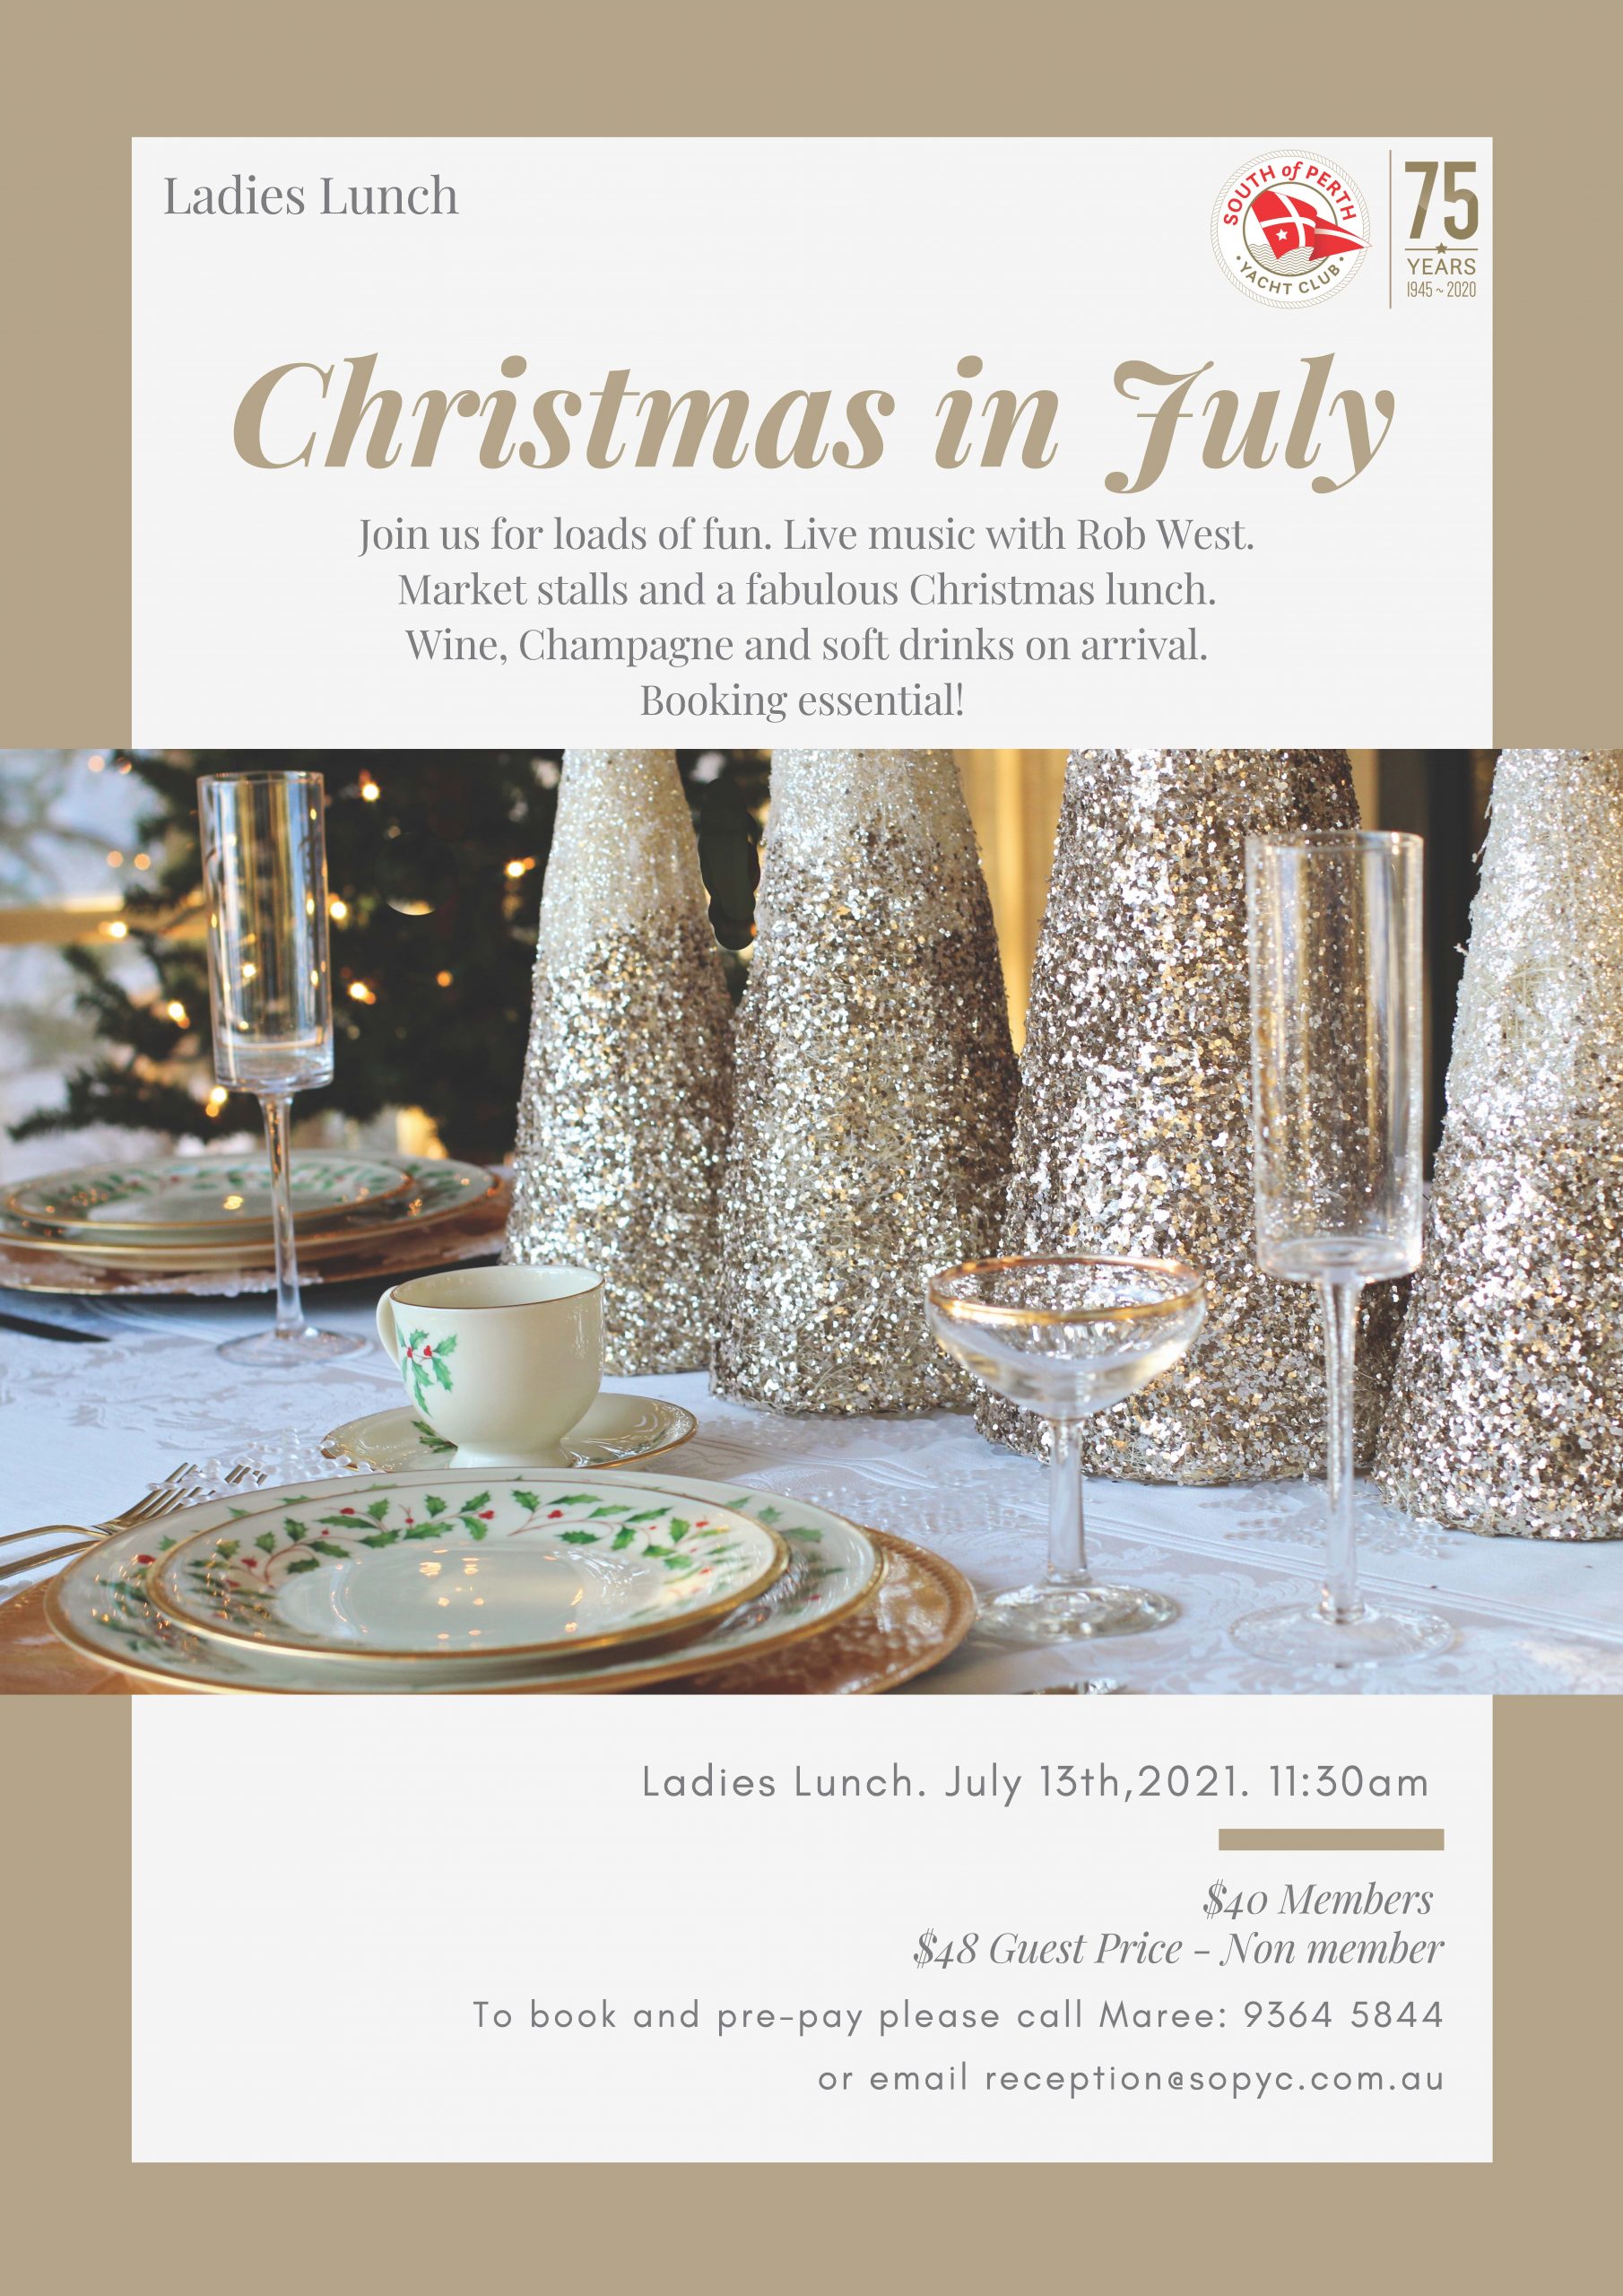 Ladies Lunch - Christmas in July FULLY BOOKED